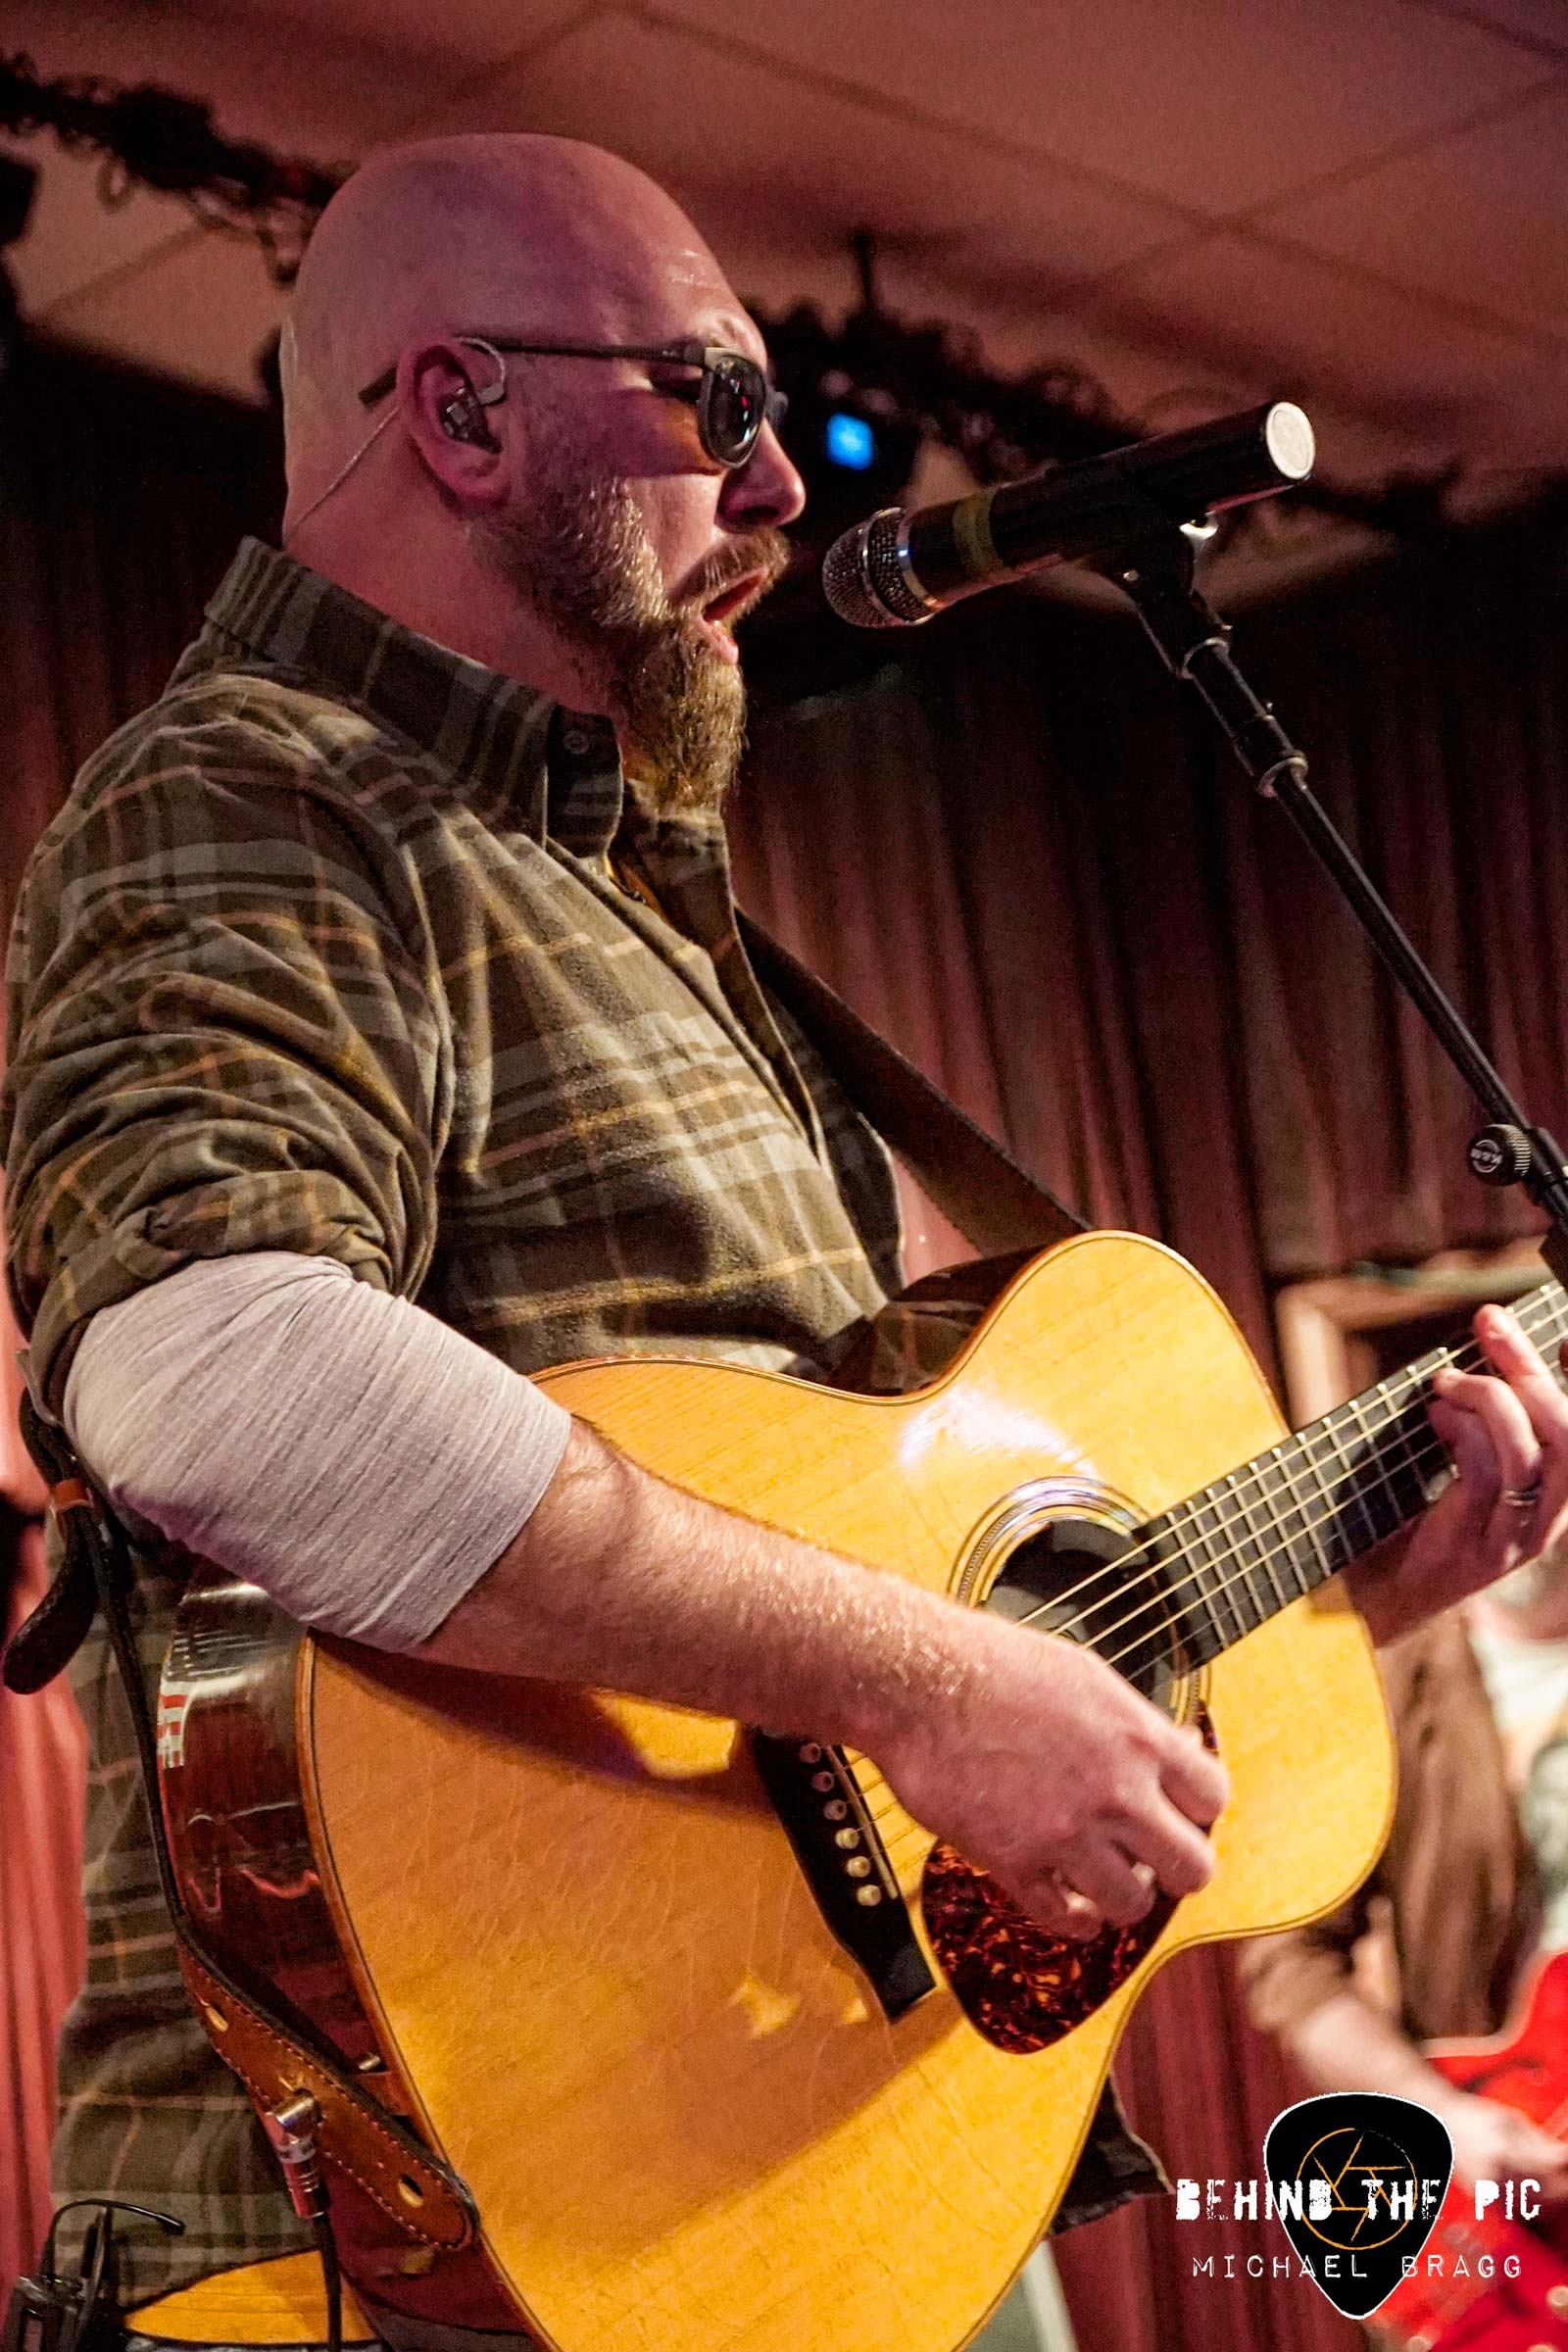 Corey Smith, The Blind Horse Saloon, Behind the pic, 1600x2400 HD Handy